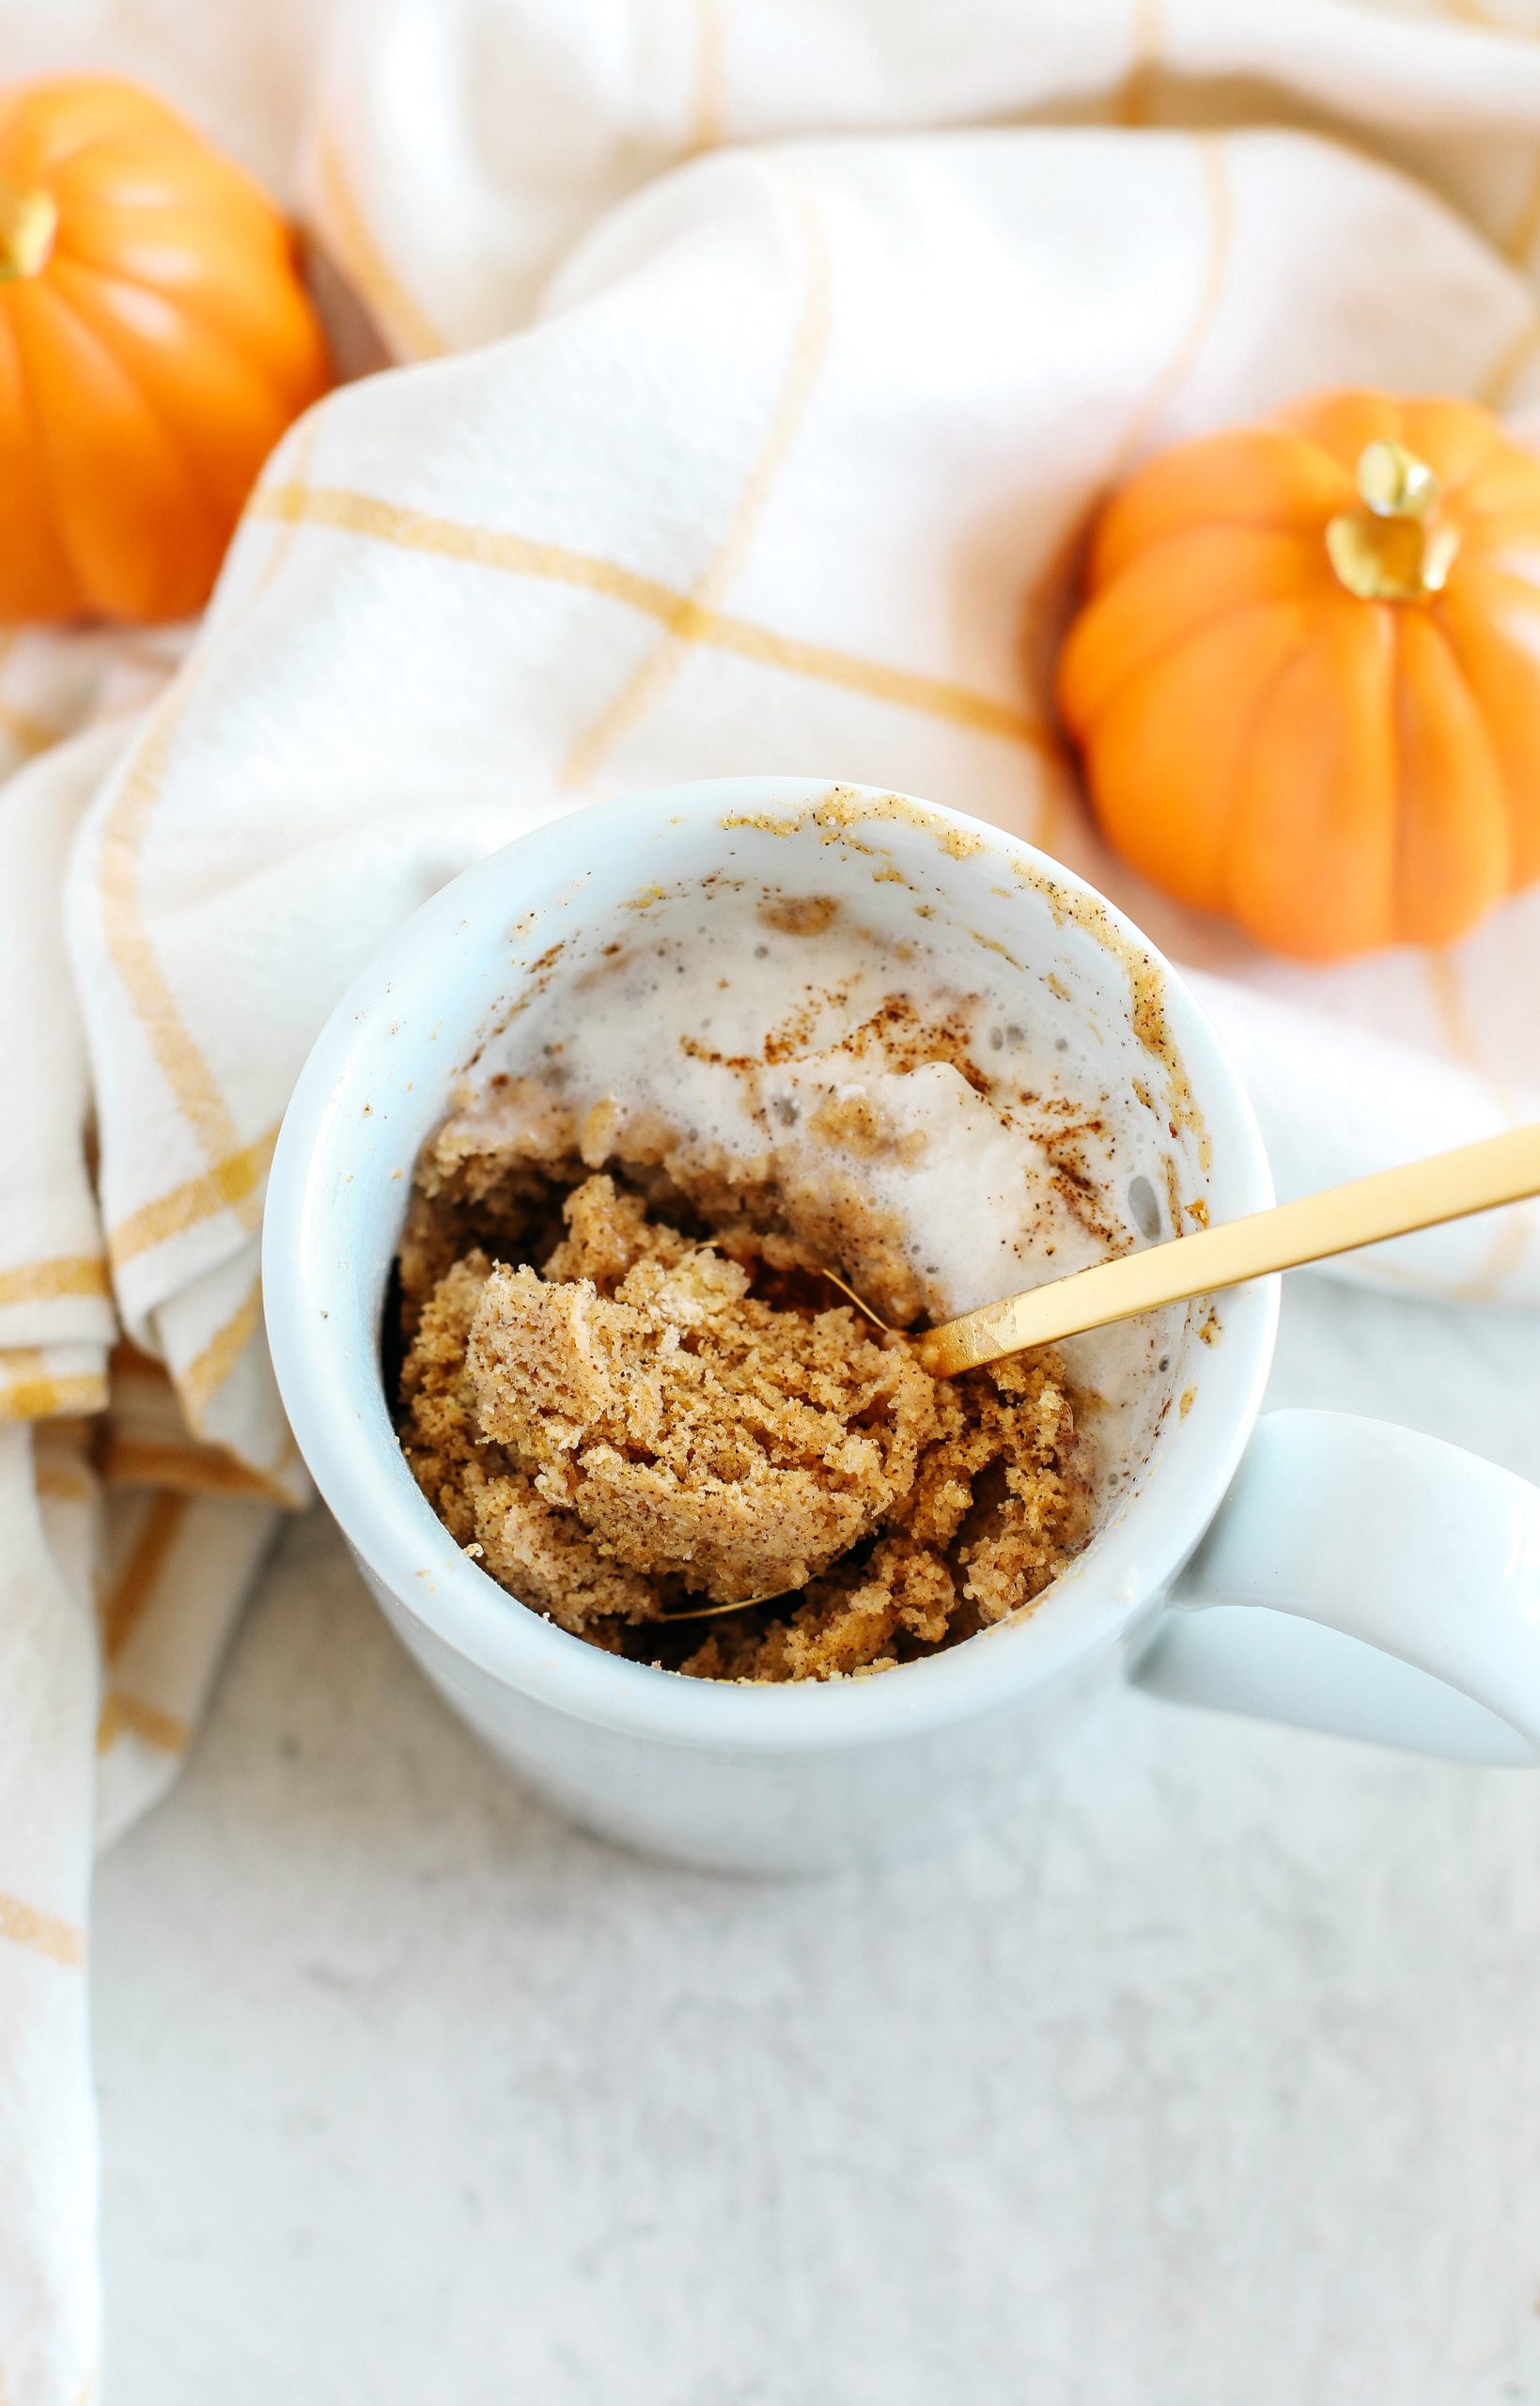 The most delicious Pumpkin Spice Mug Cake that makes the perfect single serving and easily made in under 2 minutes!  It's also gluten-free, dairy-free and paleo!  